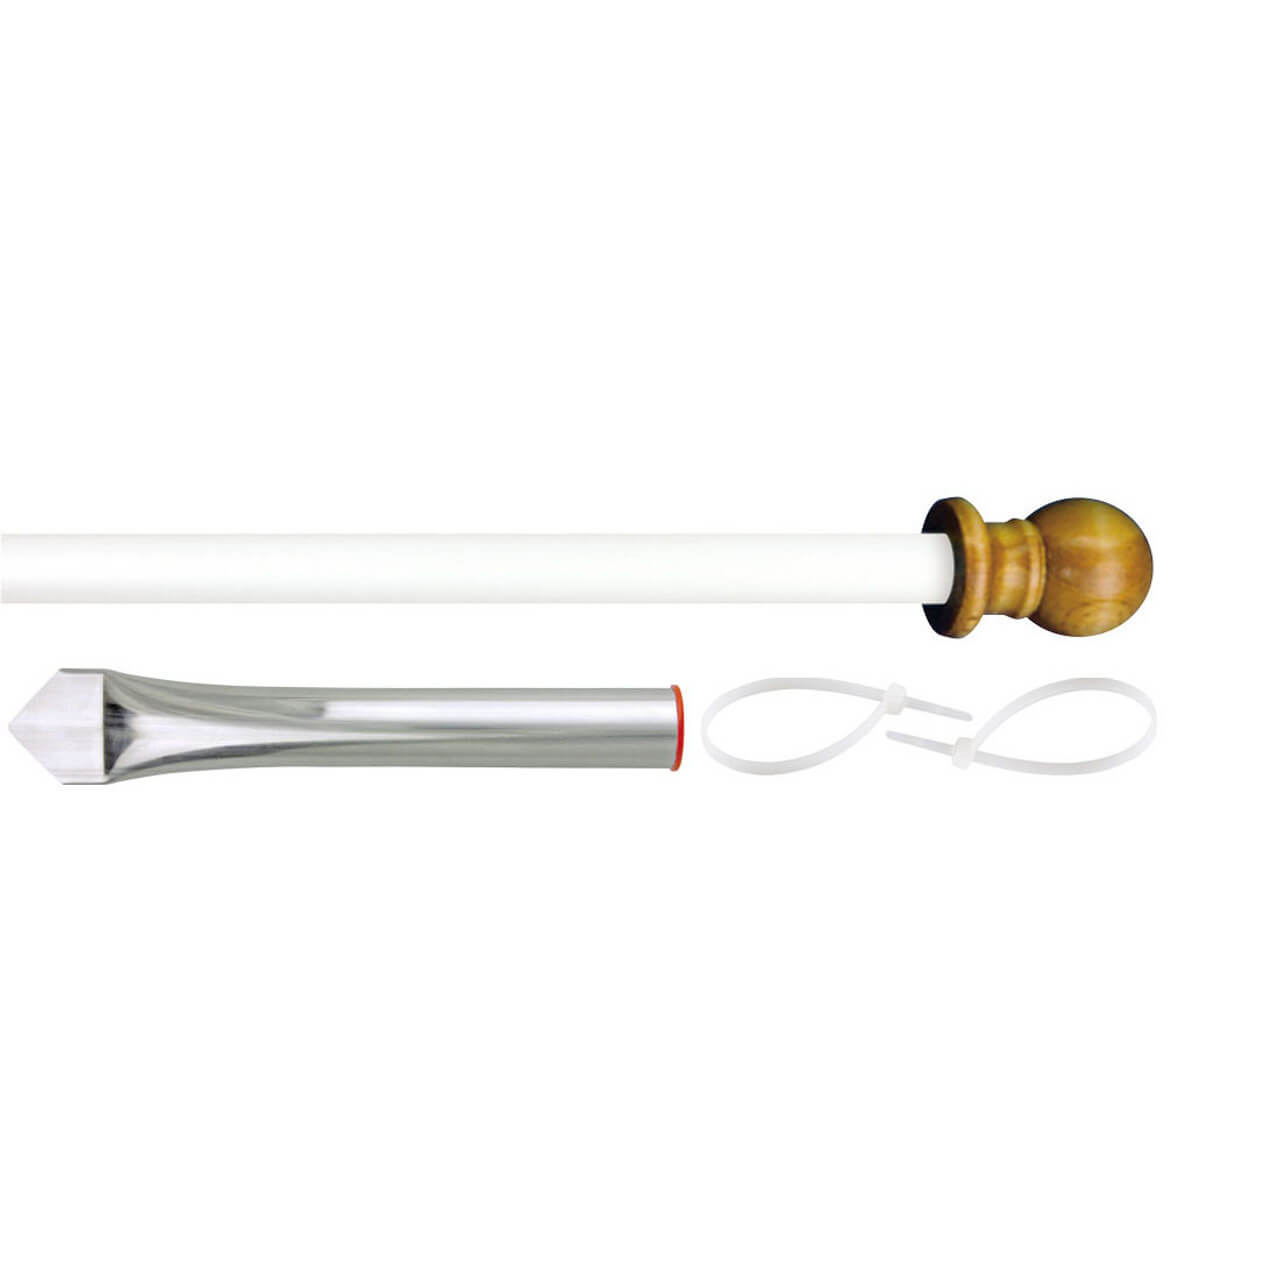 A Fiberglass pole Display flagpole set with wood ball, flag ties, and lawn socket by Action Flag